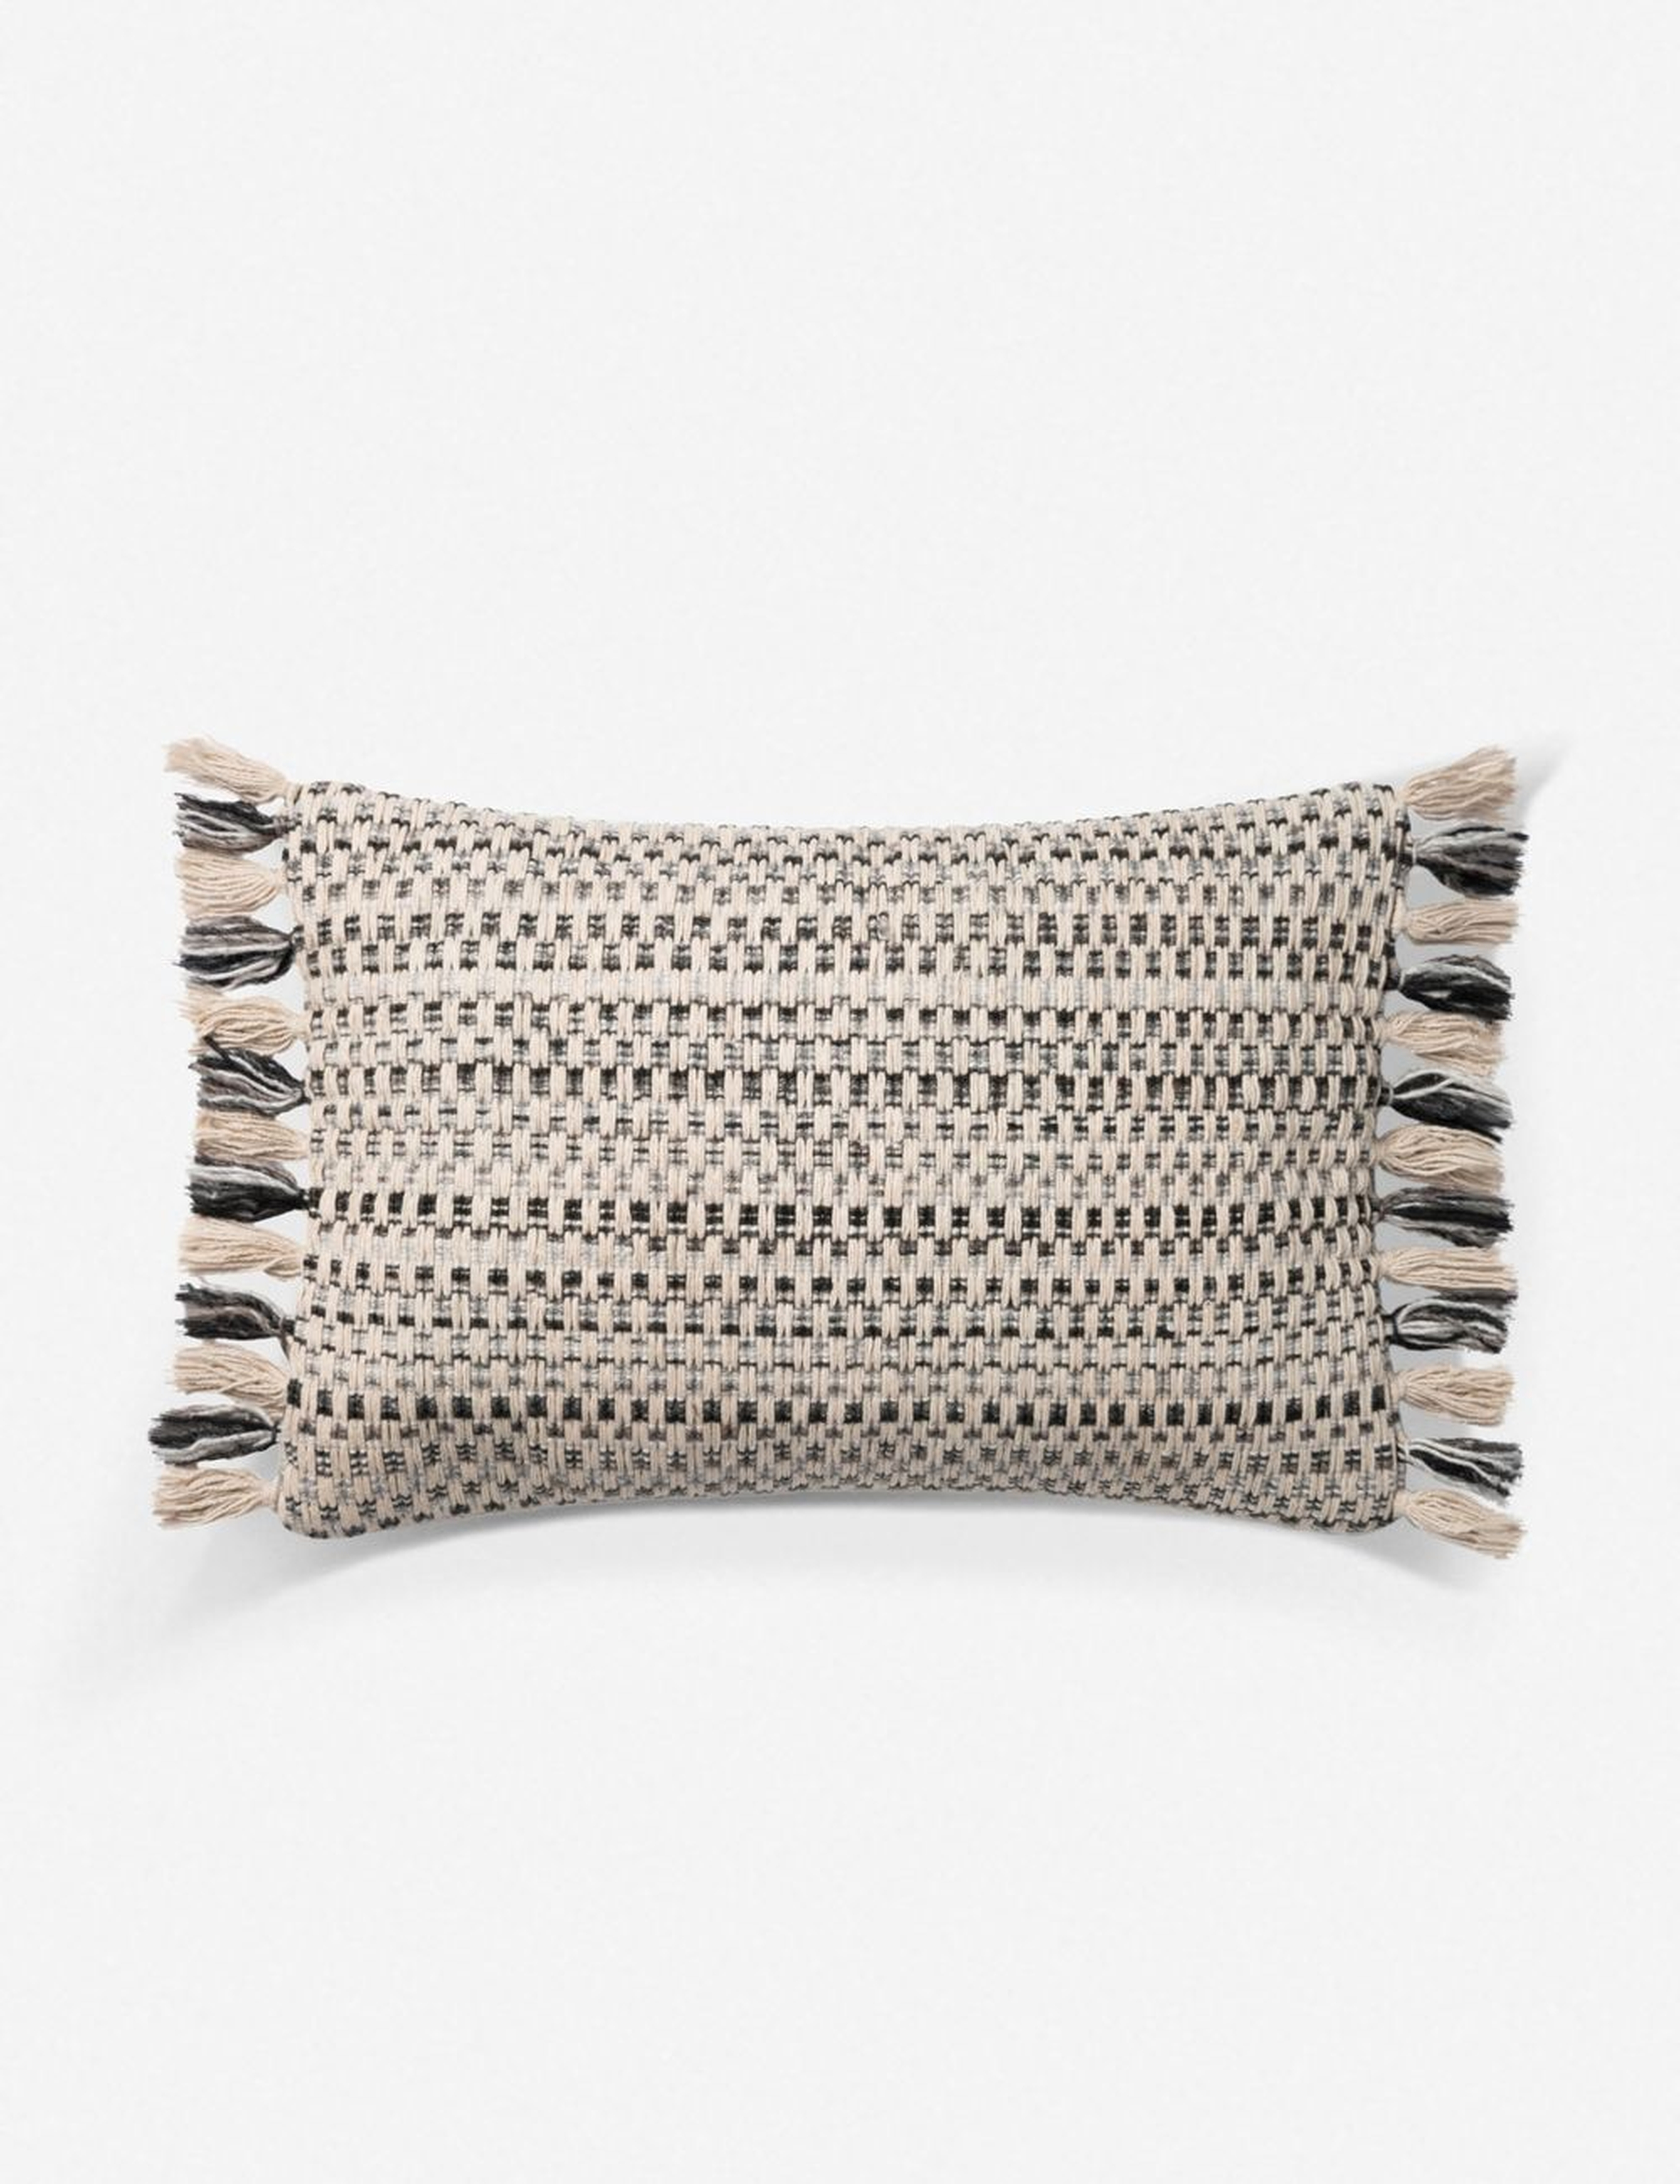 Evry Lumbar Pillow, Natural and Black, ED Ellen DeGeneres Crafted by Loloi - Lulu and Georgia